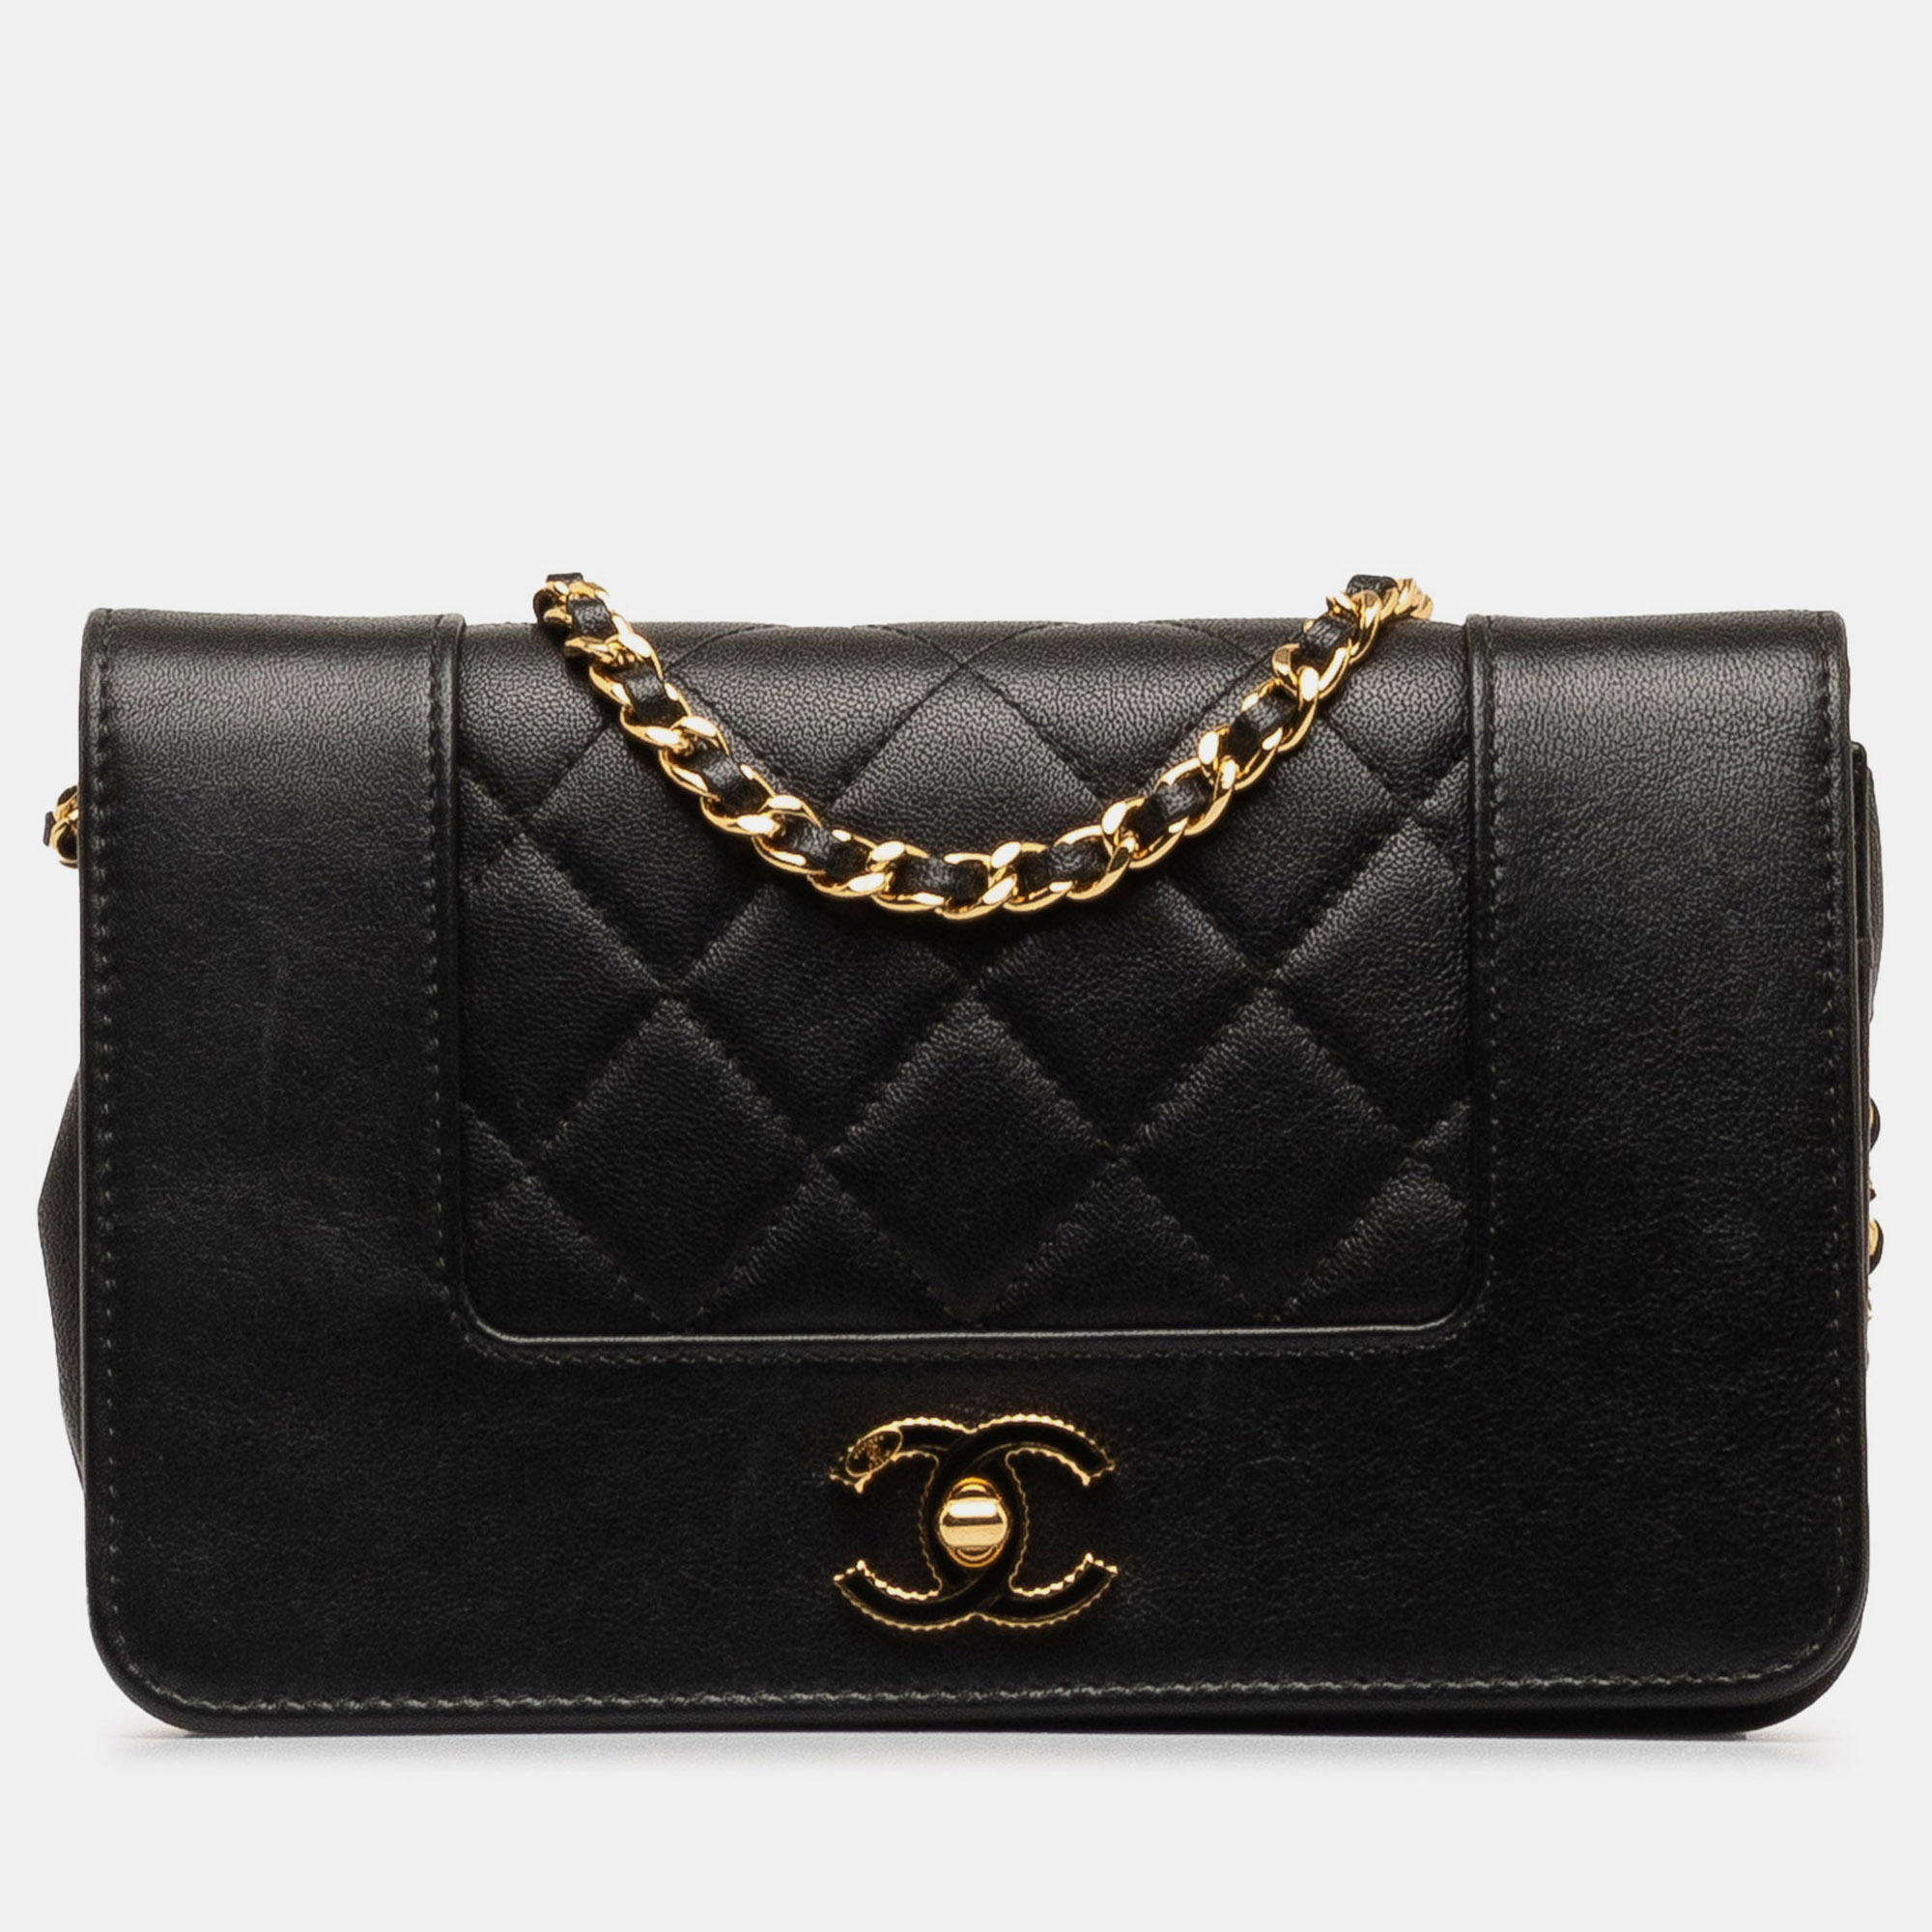 Chanel mademoiselle wallet on chain